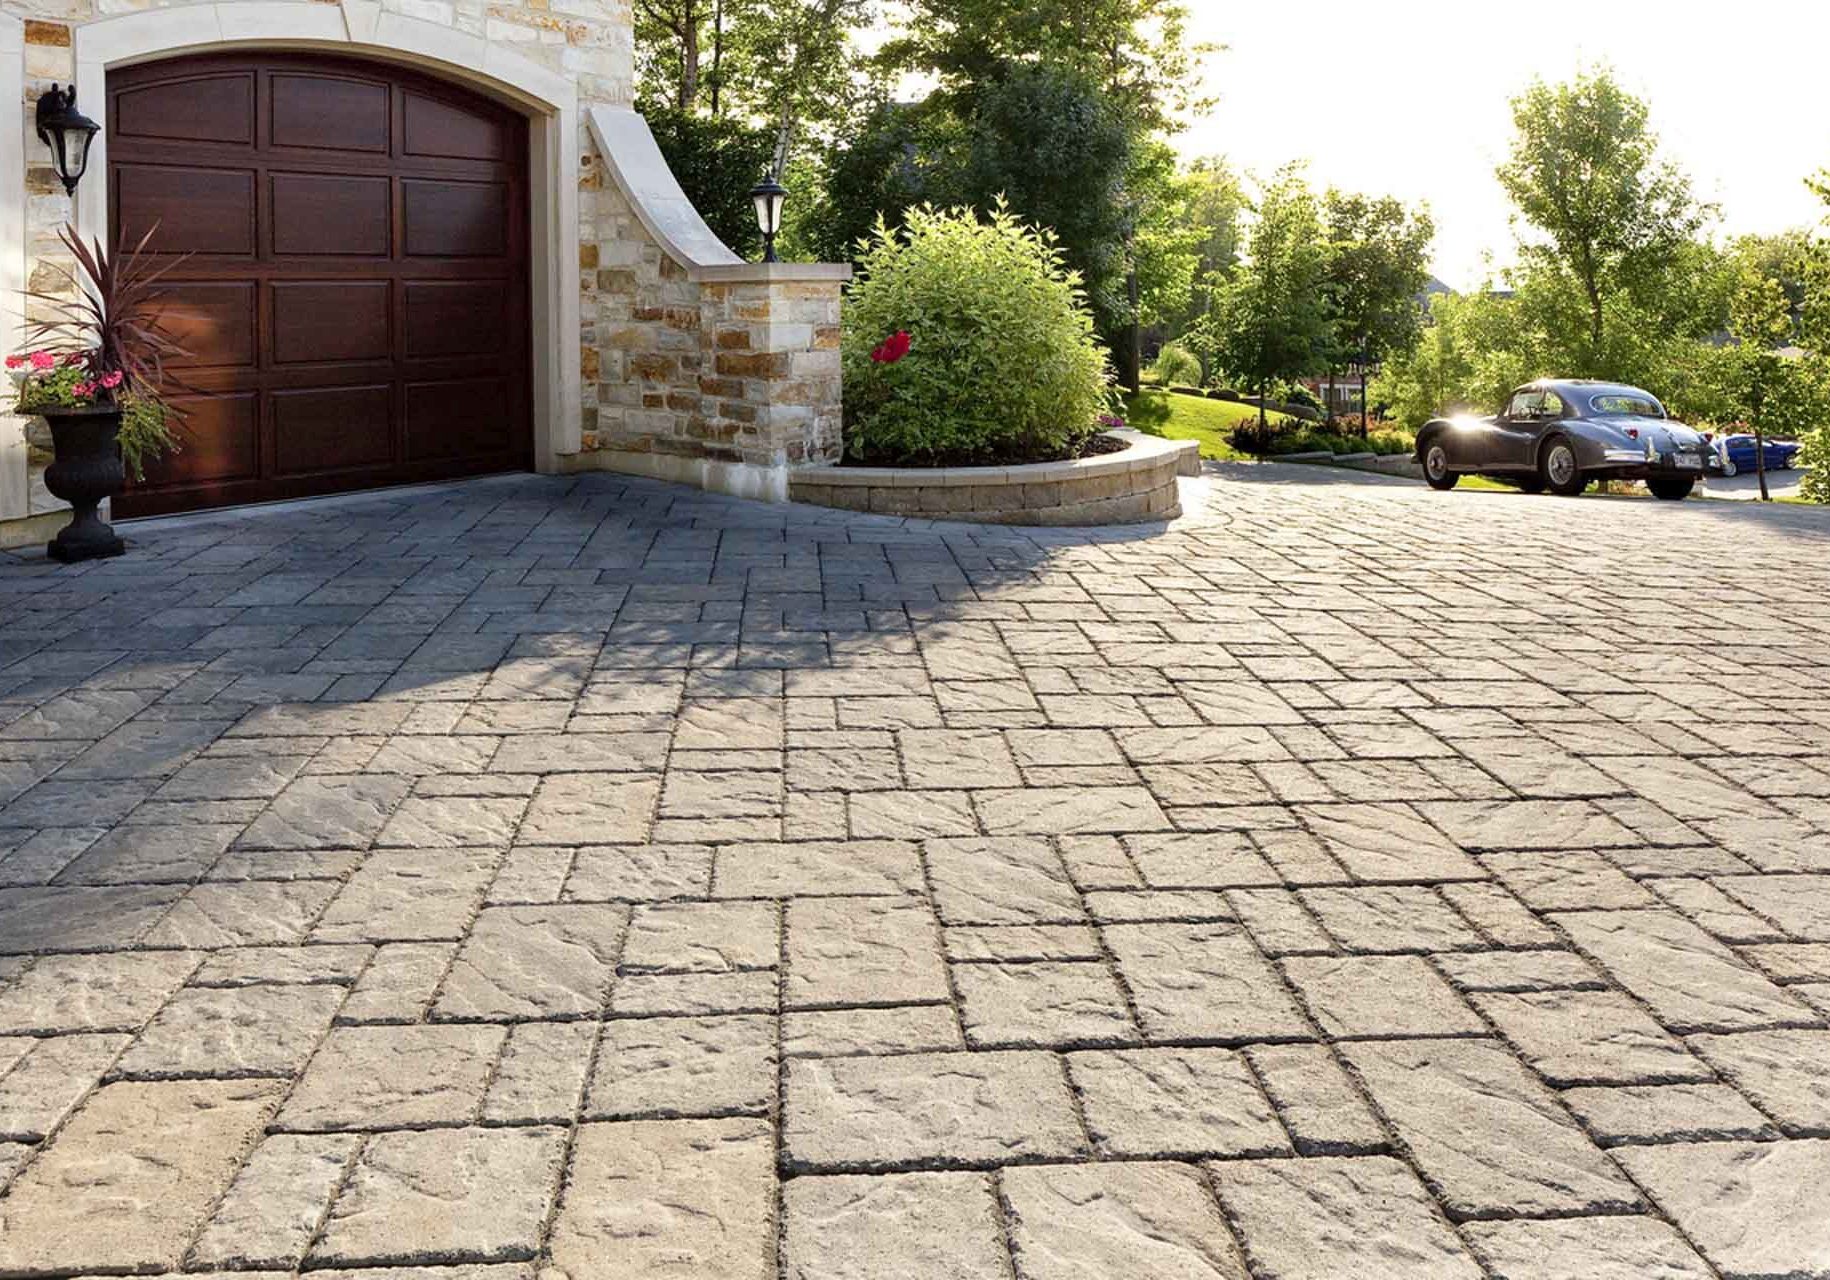 A driveway with stone pavers and a garage.